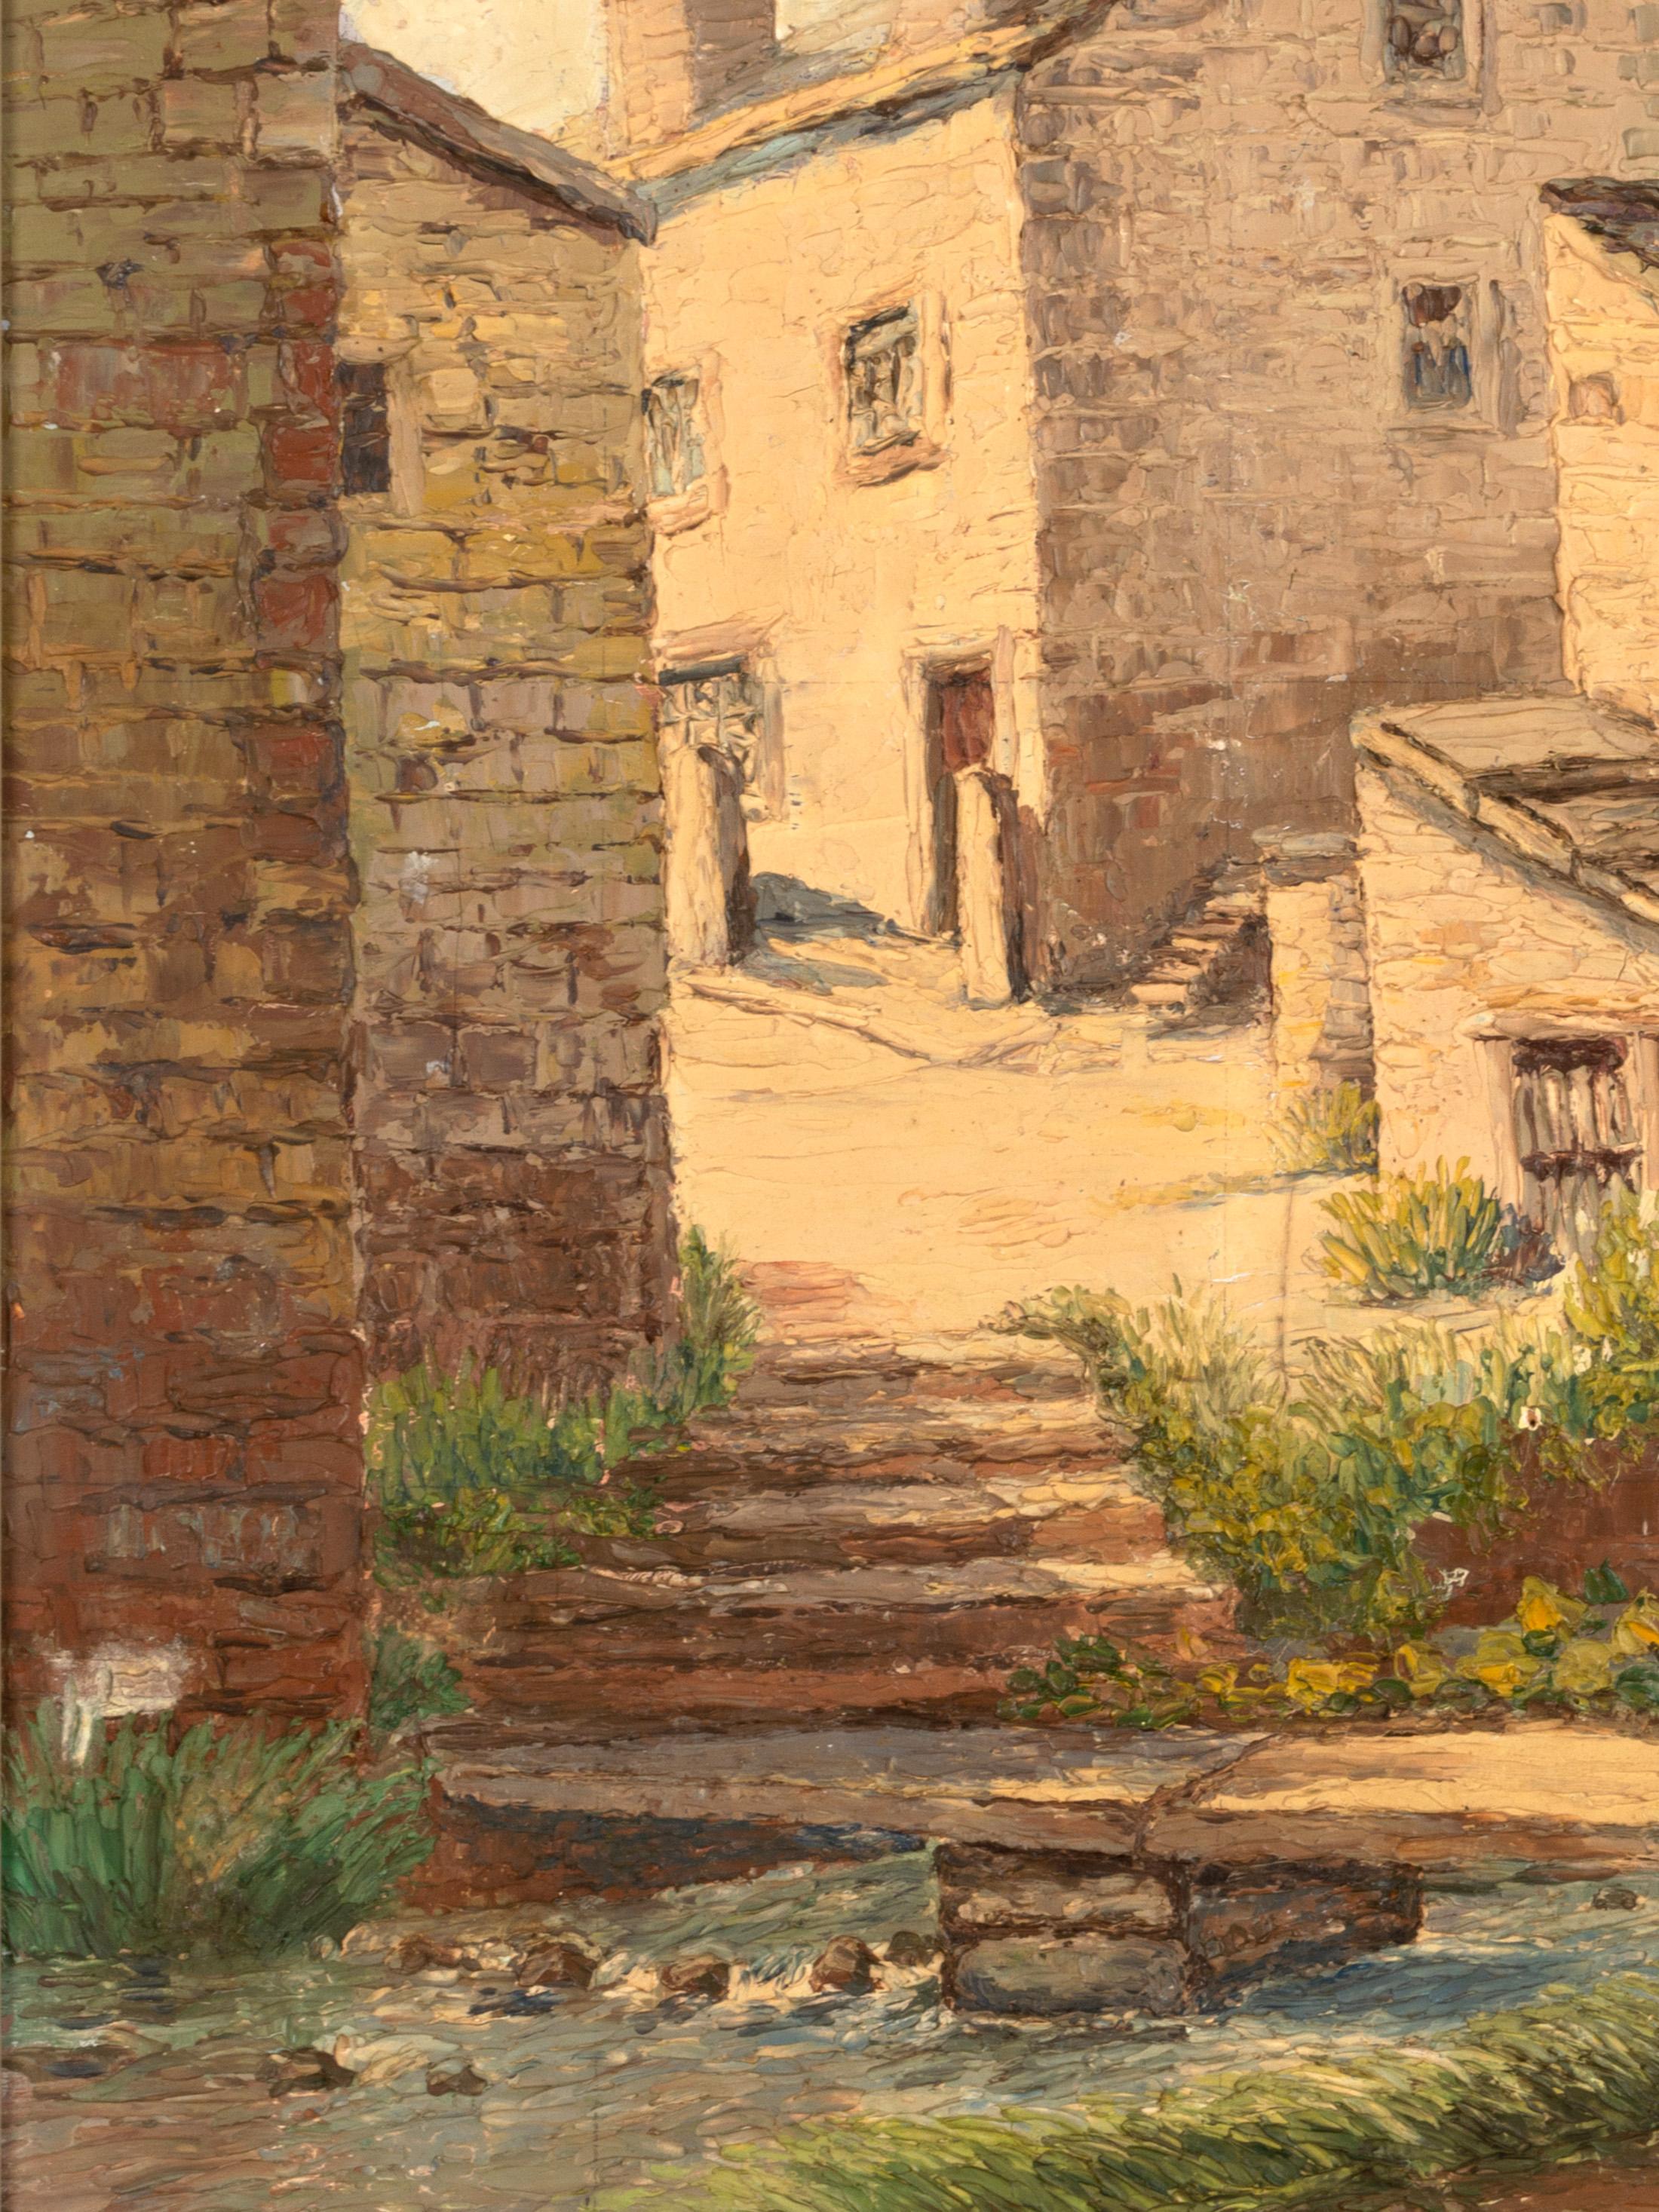 An English Mid 20th Century oil on Board of a Yorkshire Street Scene Signed A. Dransfield C.1960.

A skilfully executed painting. The label to the reverse indicates that the piece was exhibited in Bradford Museums Cartwright Hall Art Gallery in